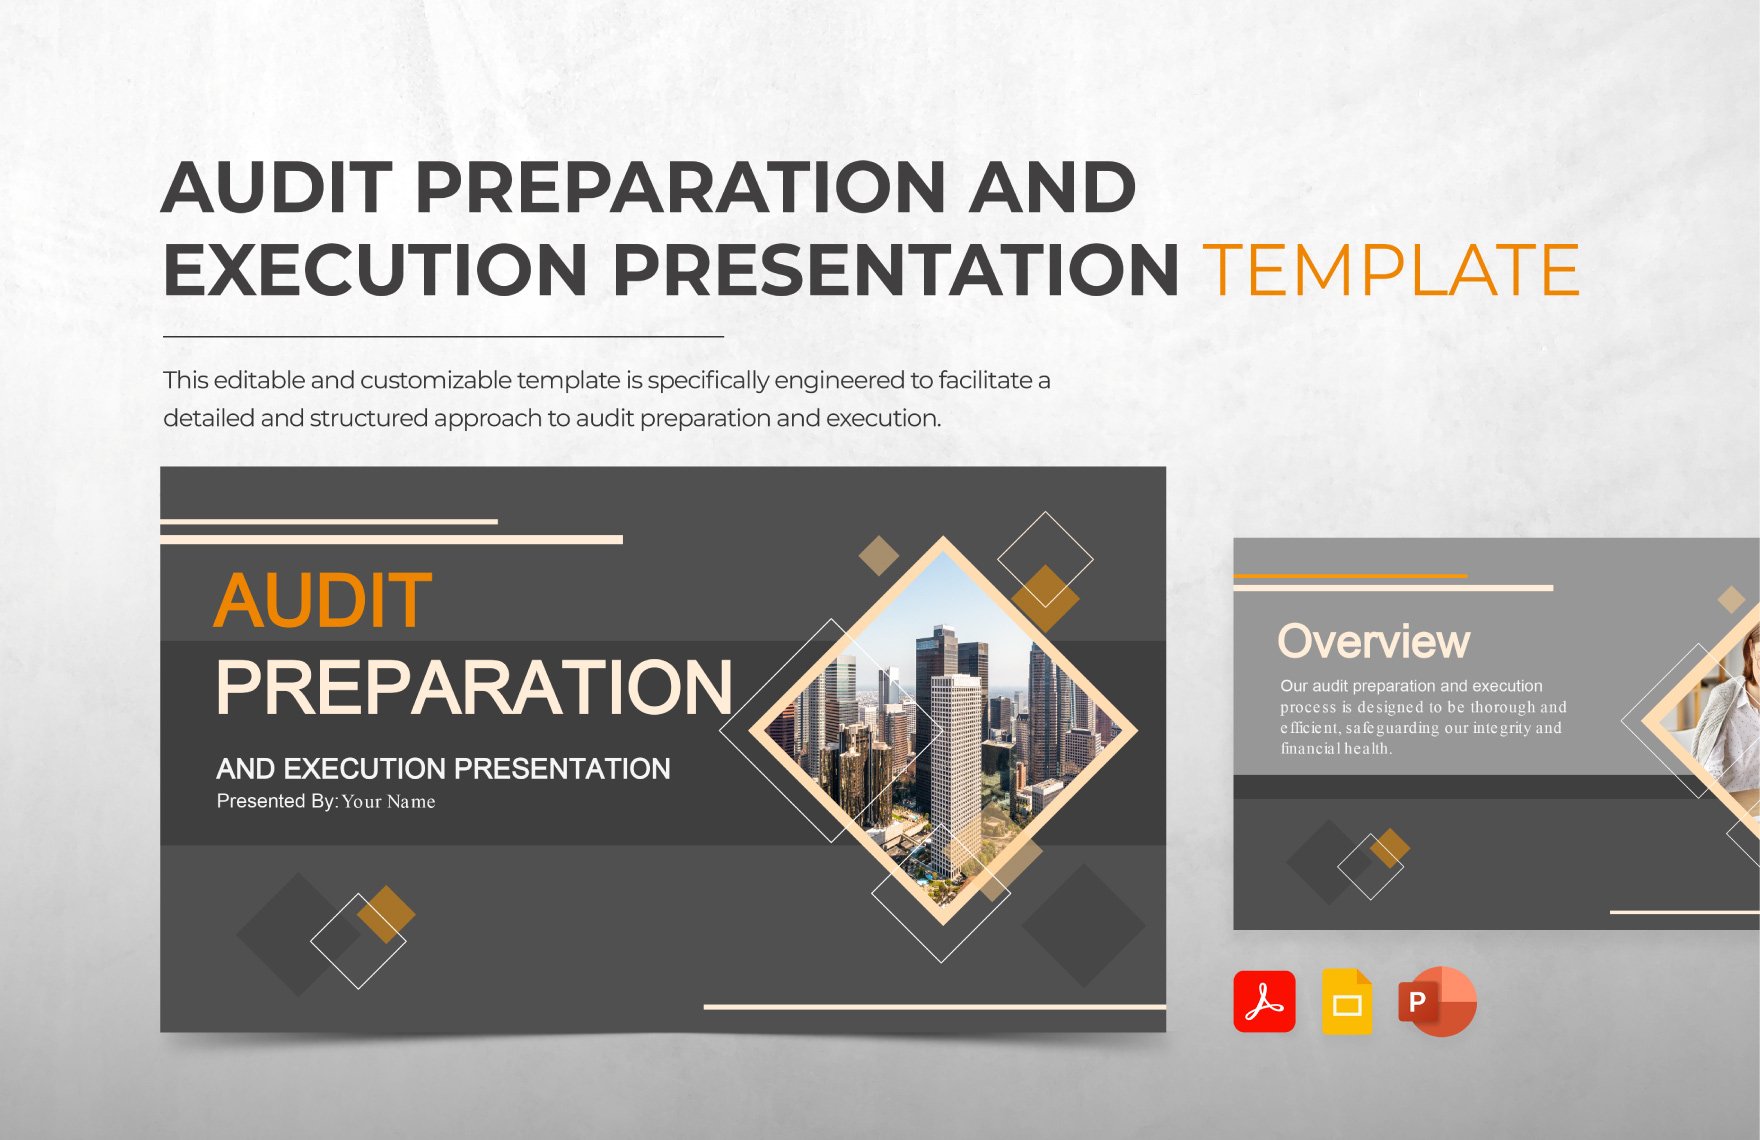 Free Audit Preparation and Execution Presentation Template